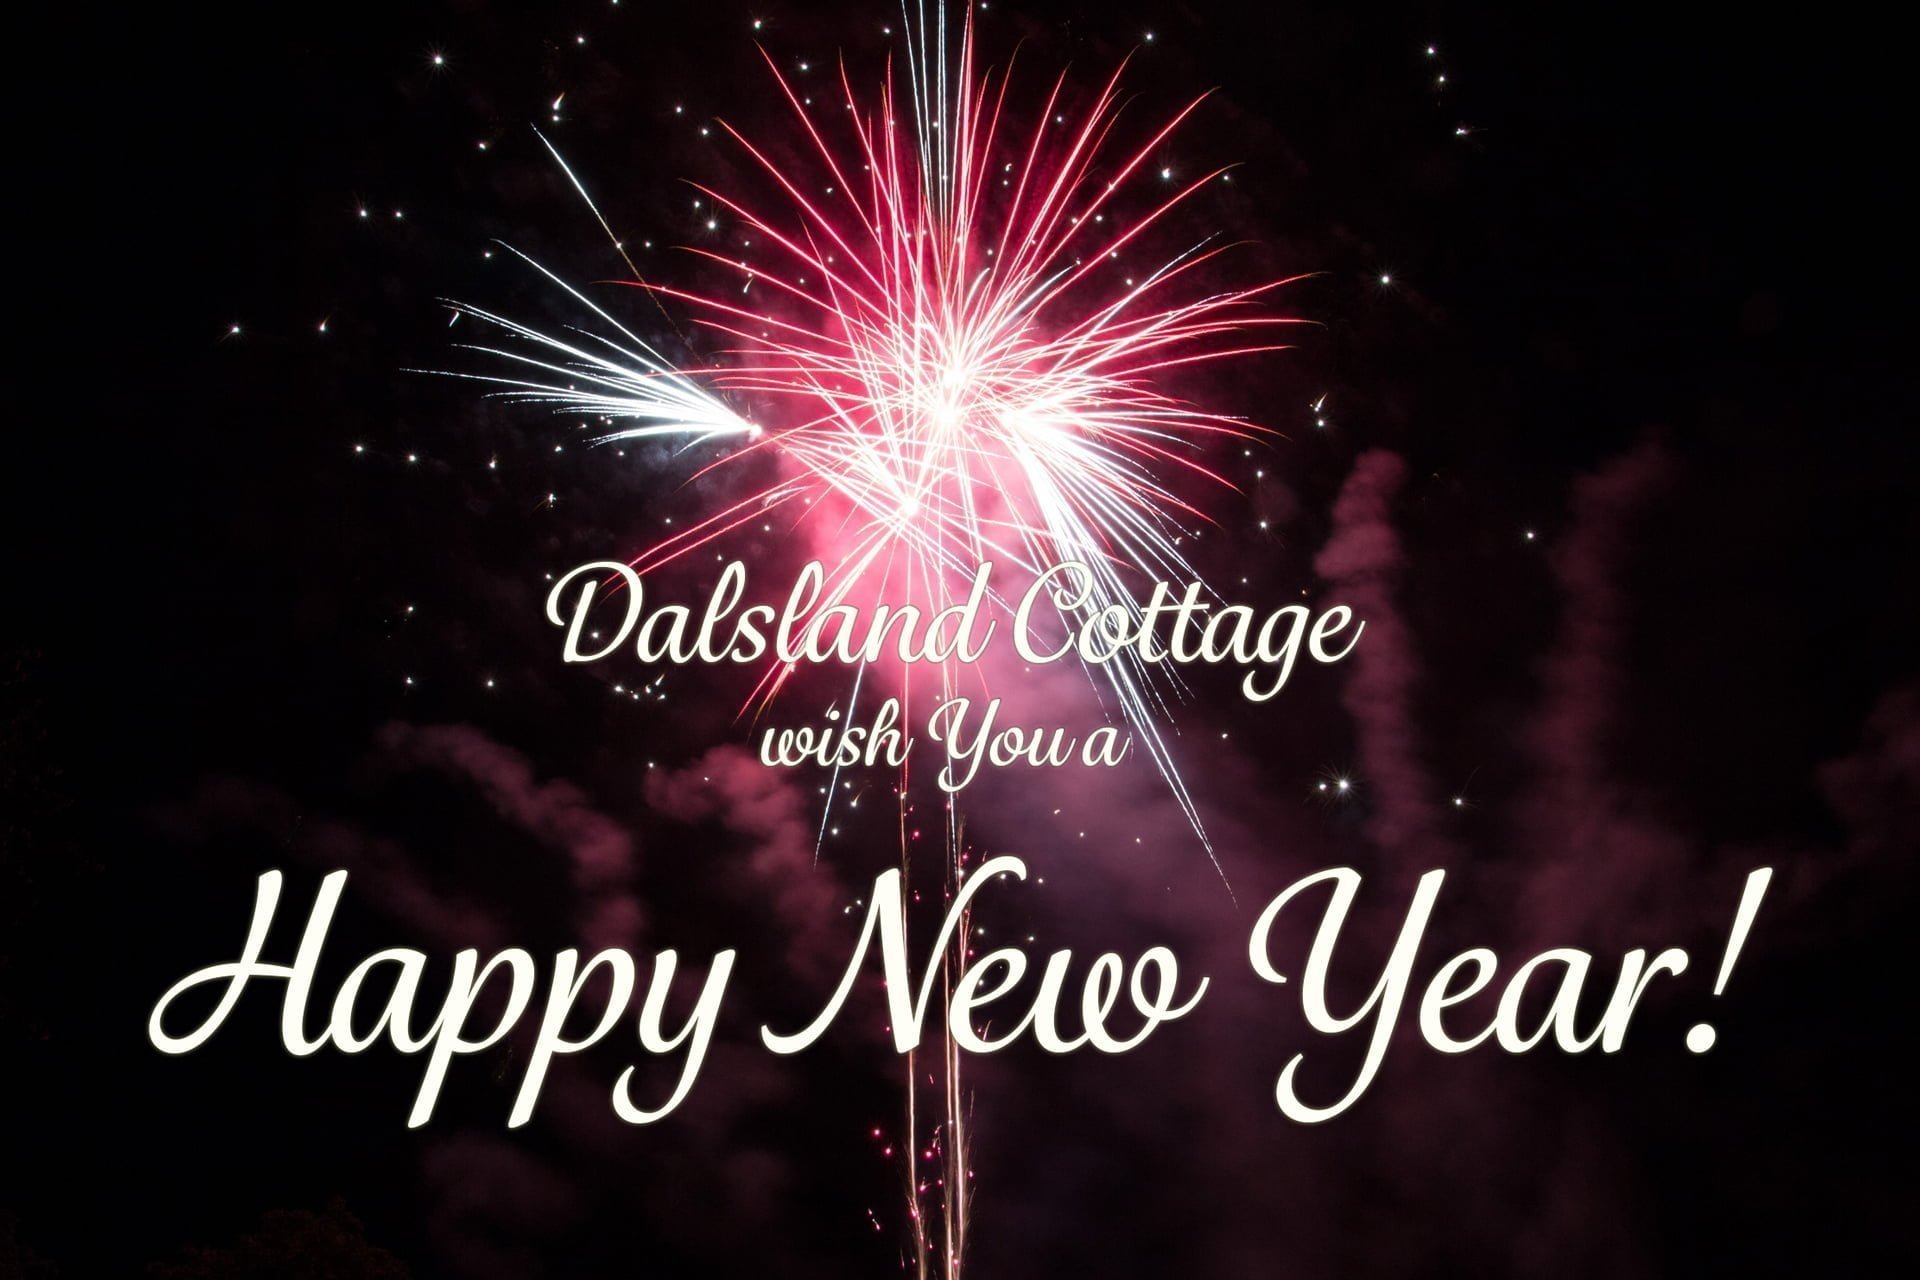 happy-new-year-dalsland-cottage